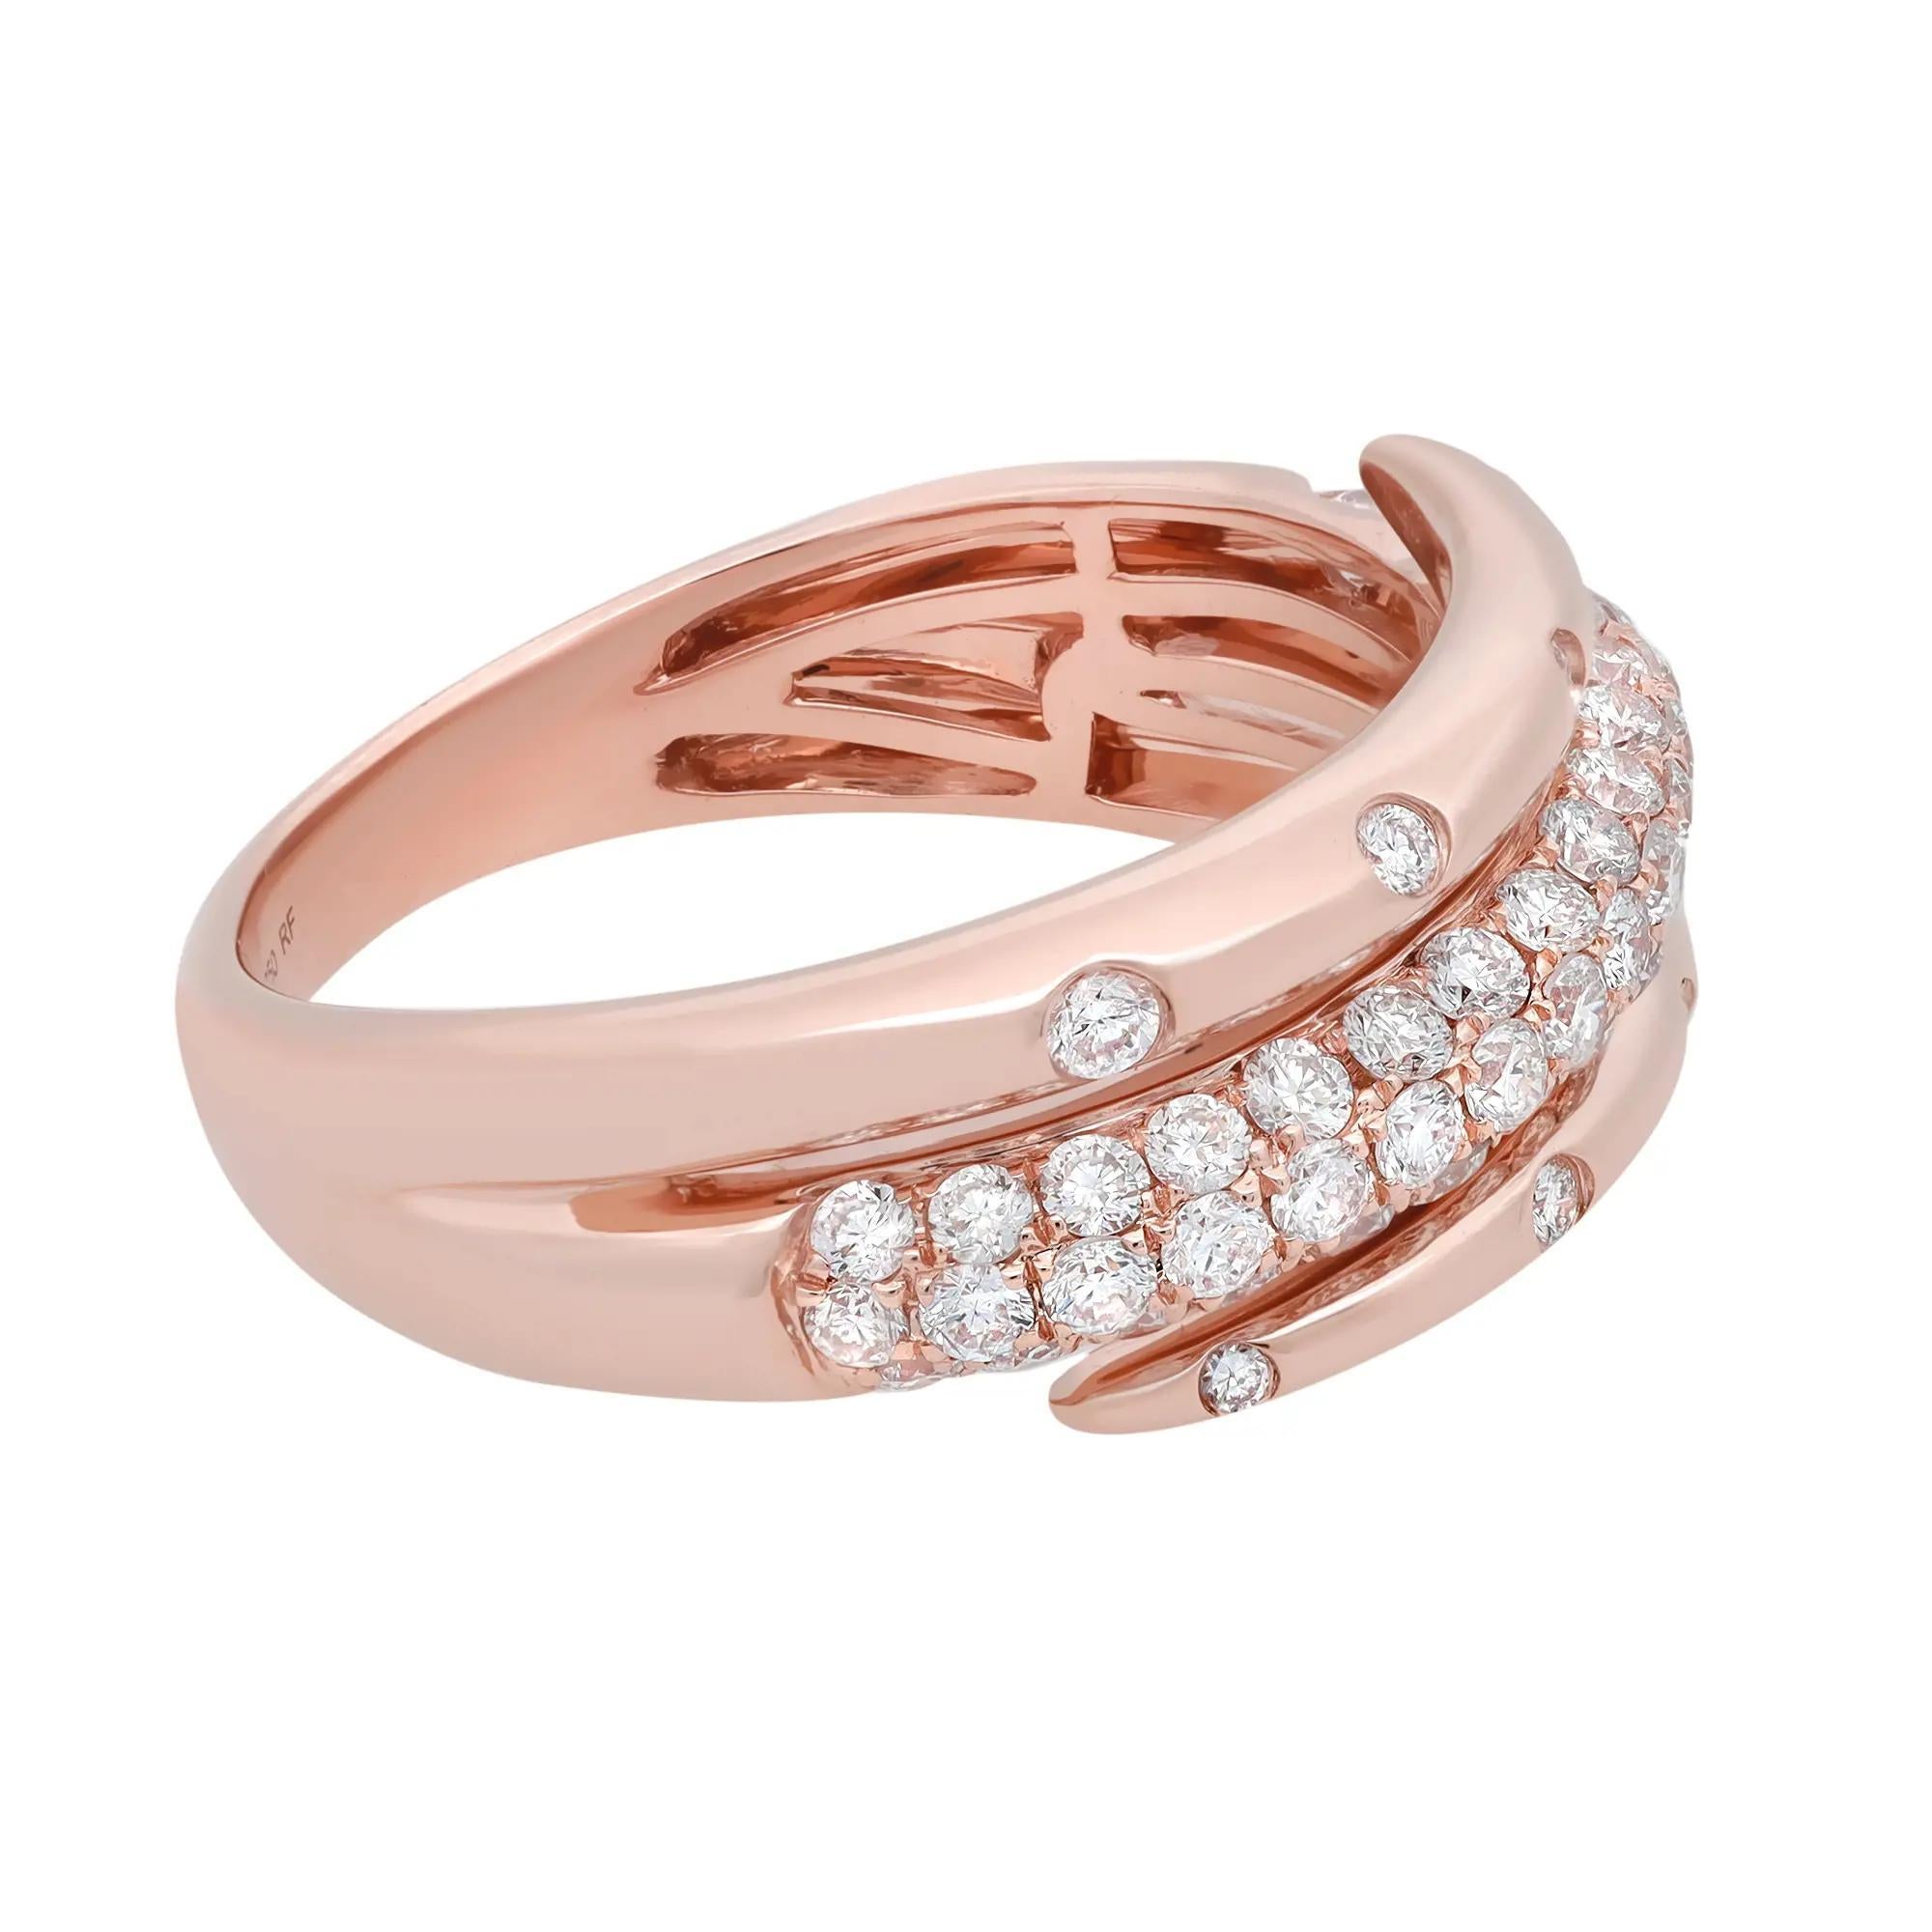 This beautiful spiral diamond ring is all about sparkle and glamour. Crafted in high polished 18k rose gold. This spiral style features 57 round brilliant cut diamonds with a center row of pave set shimmering diamonds and two half rows with